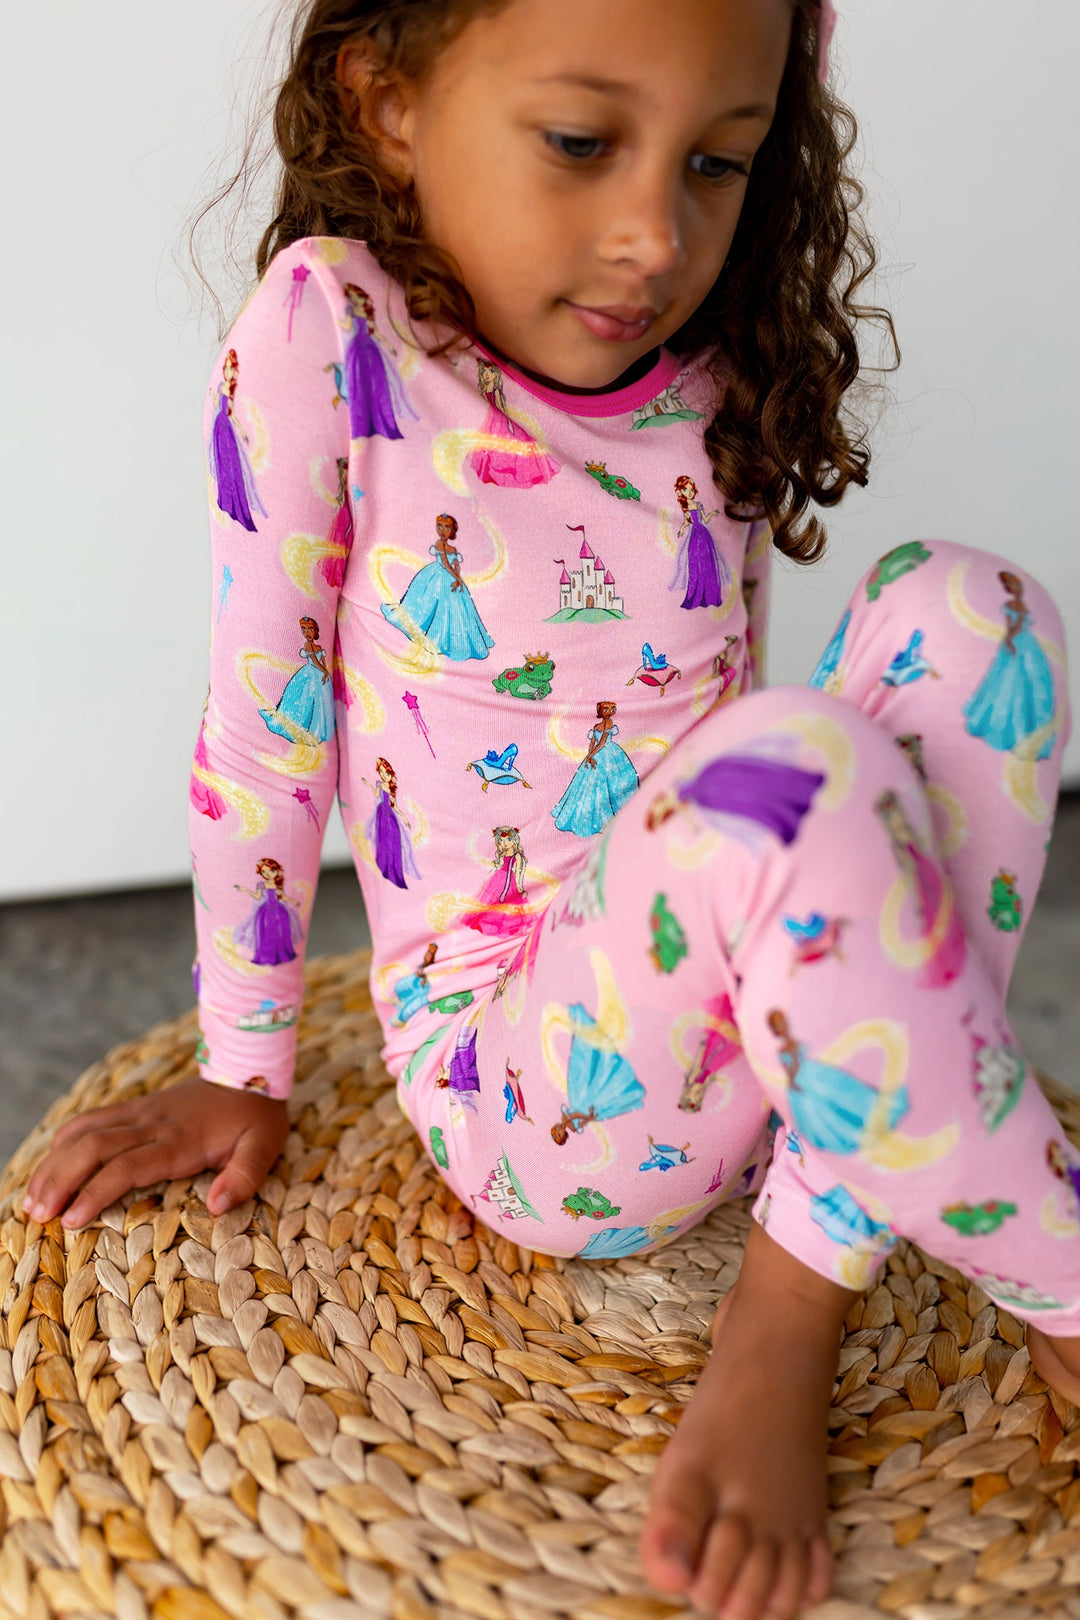 Mountain Moose Kid's Long Sleeve PJs - Forests, Tides, and Treasures